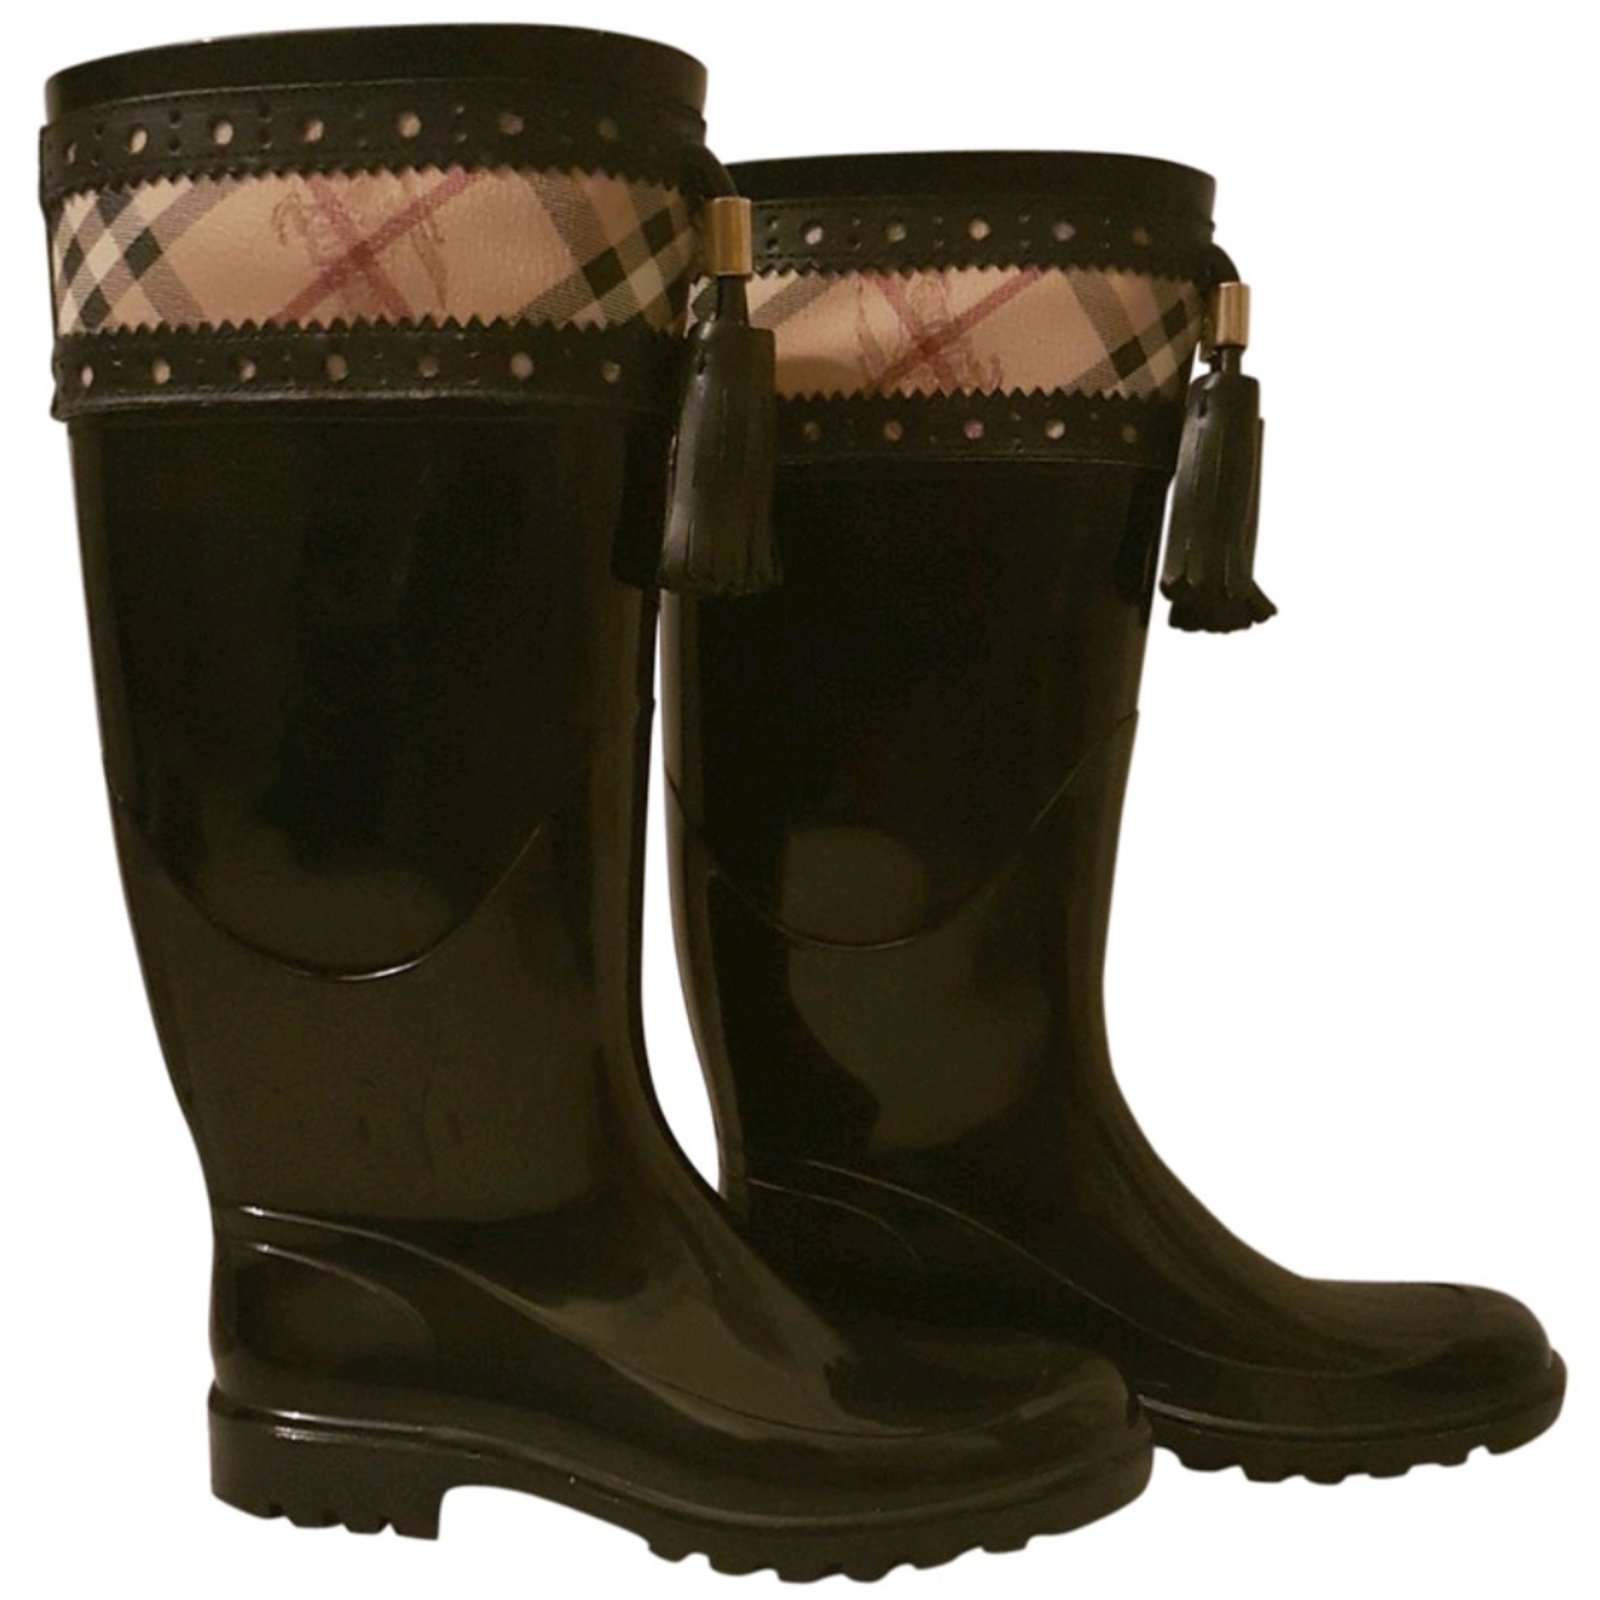 Burberry Rain Boots Boots Other Black 